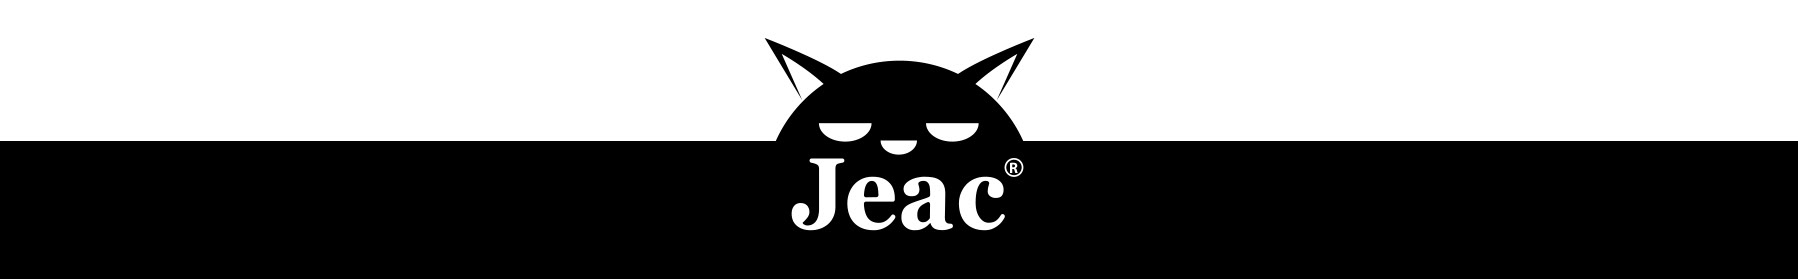 JEAC NEW's profile banner